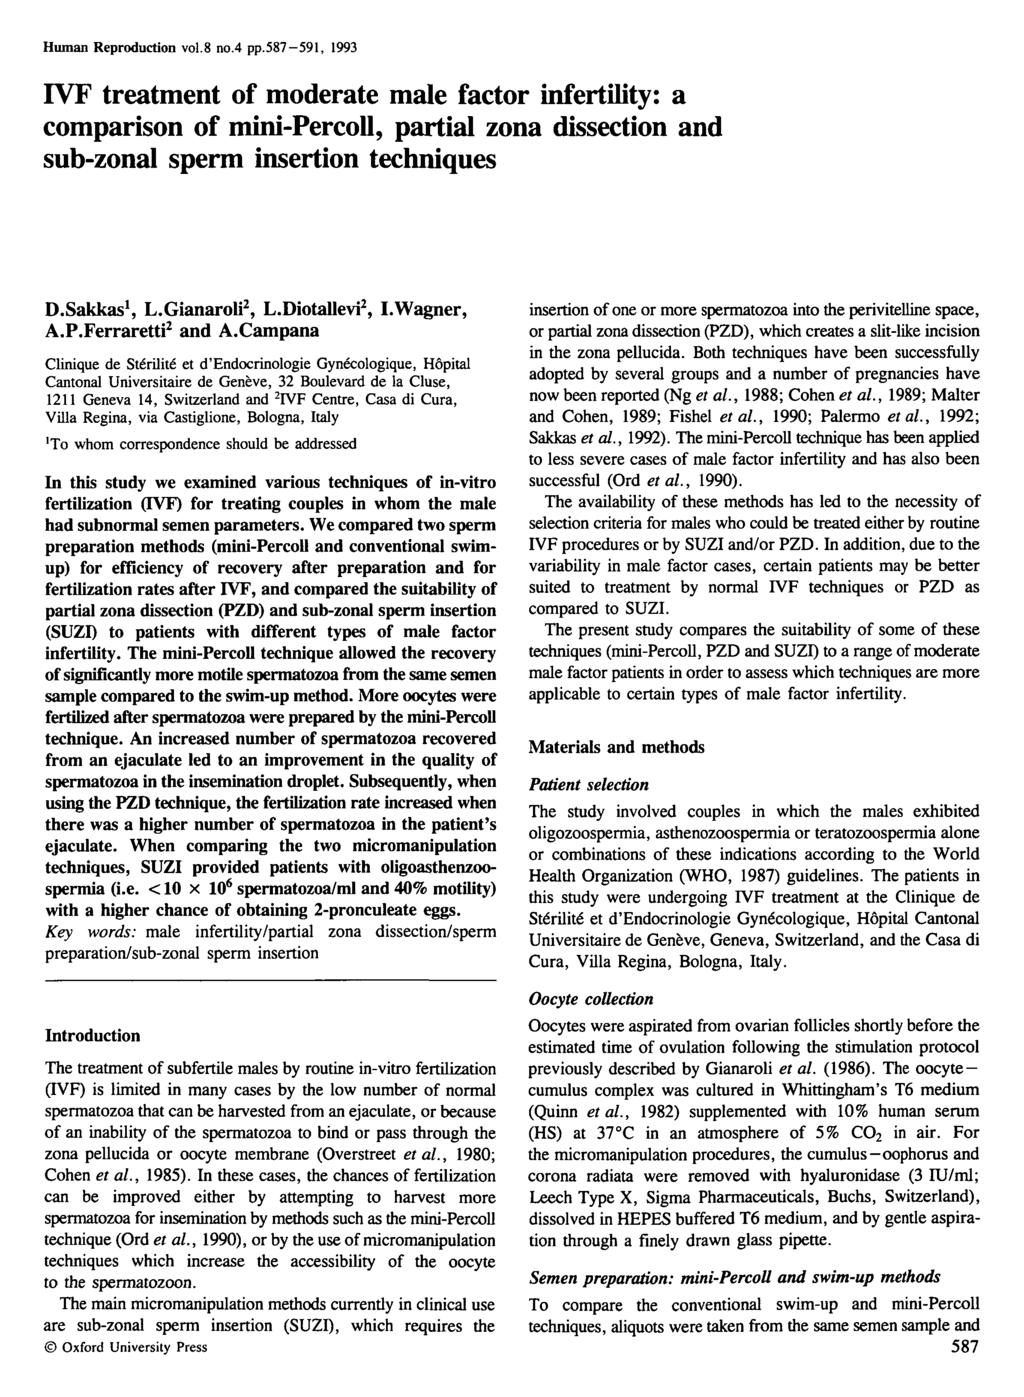 Human Reproduction vol.8 no.4 pp.587-591, 1993 FVF treatment of moderate male factor infertility: a comparison of mini-percoll, partial zona dissection and sub-zonal sperm insertion techniques D.